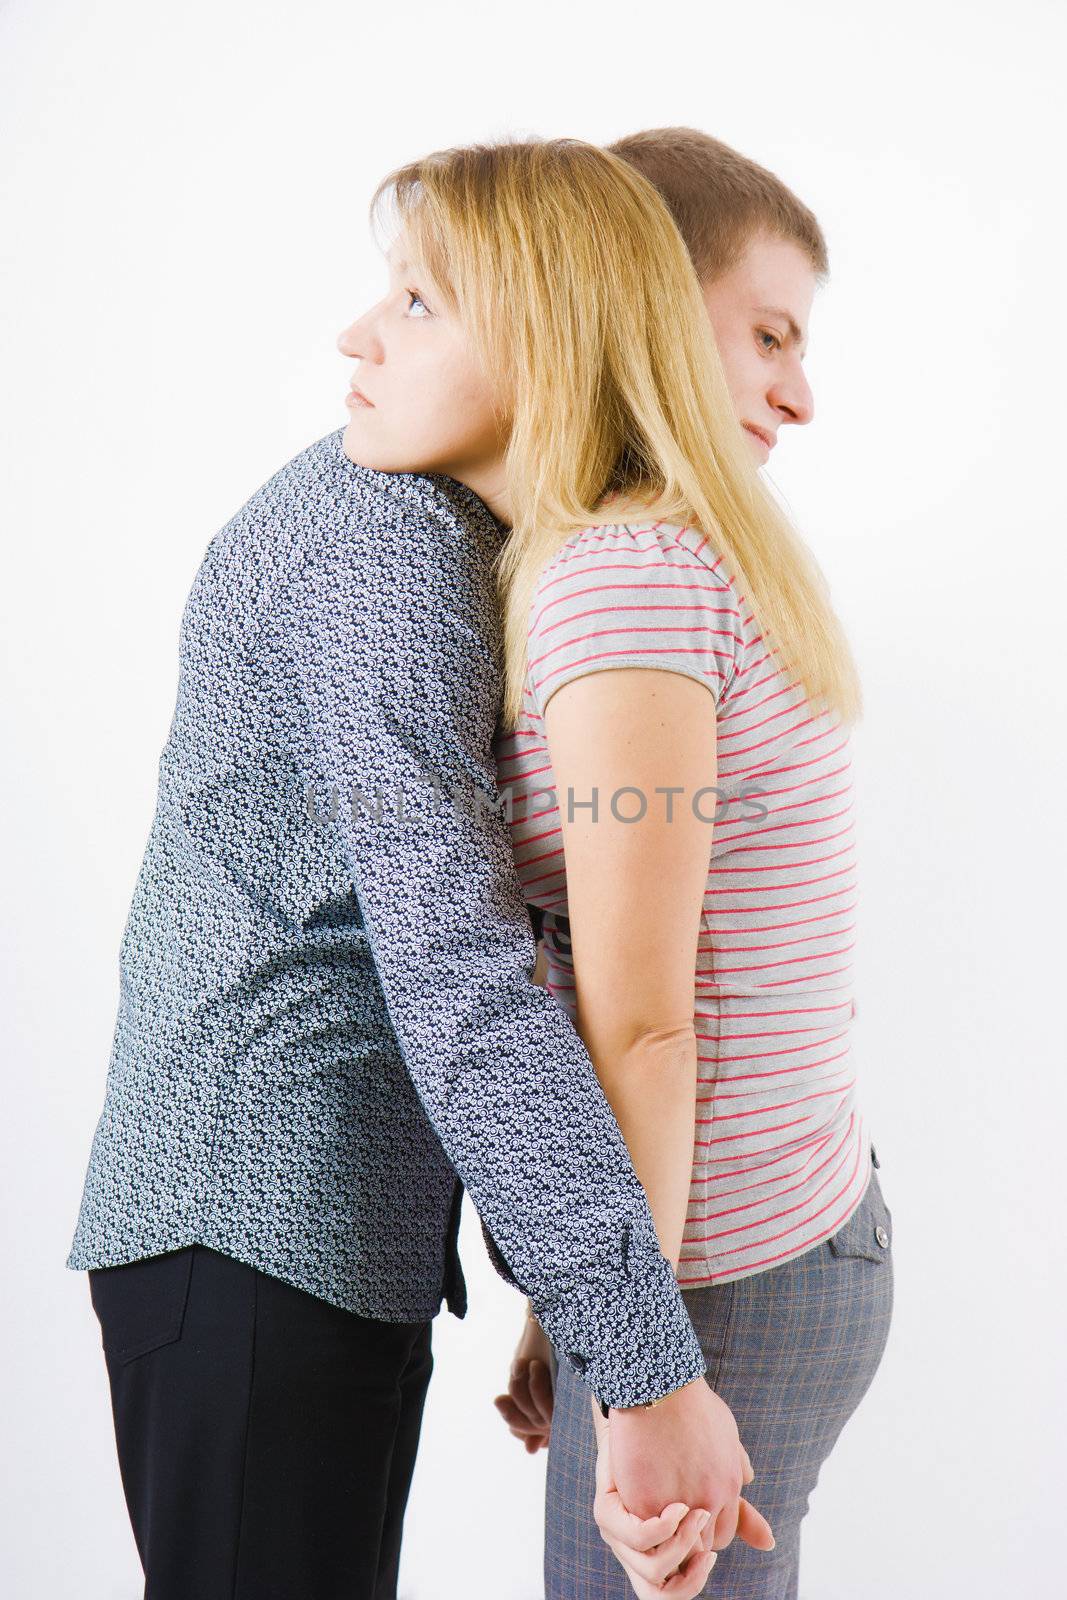 A young couple embraces on a white background
